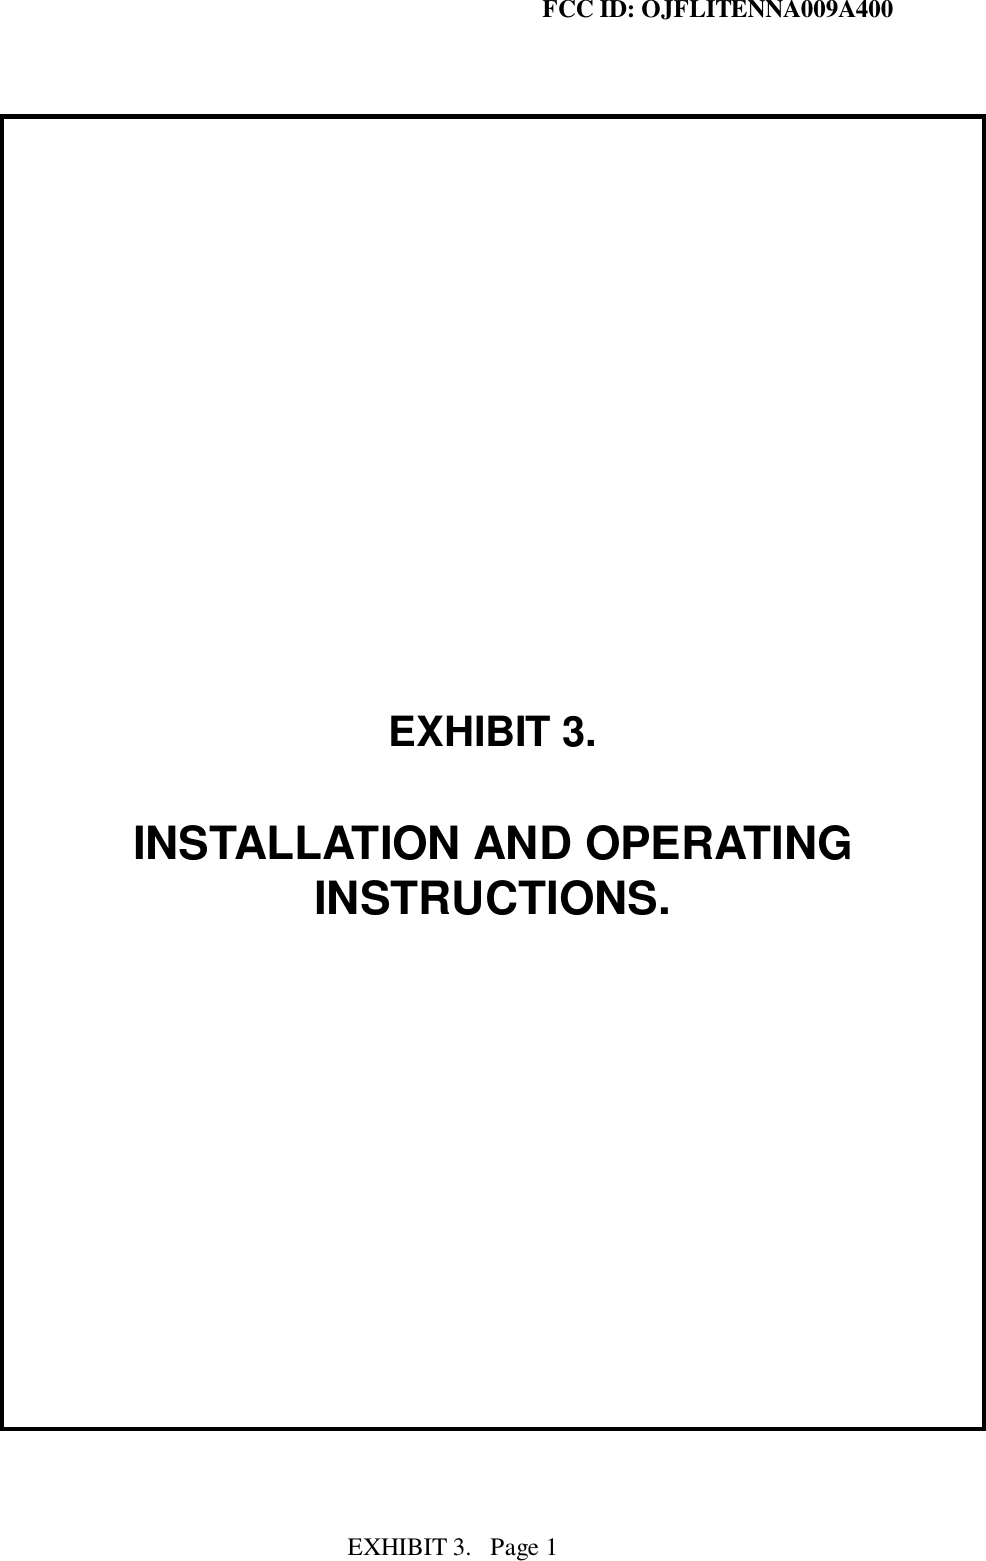 FCC ID: OJFLITENNA009A400EXHIBIT 3.   Page 1EXHIBIT 3.INSTALLATION AND OPERATINGINSTRUCTIONS.